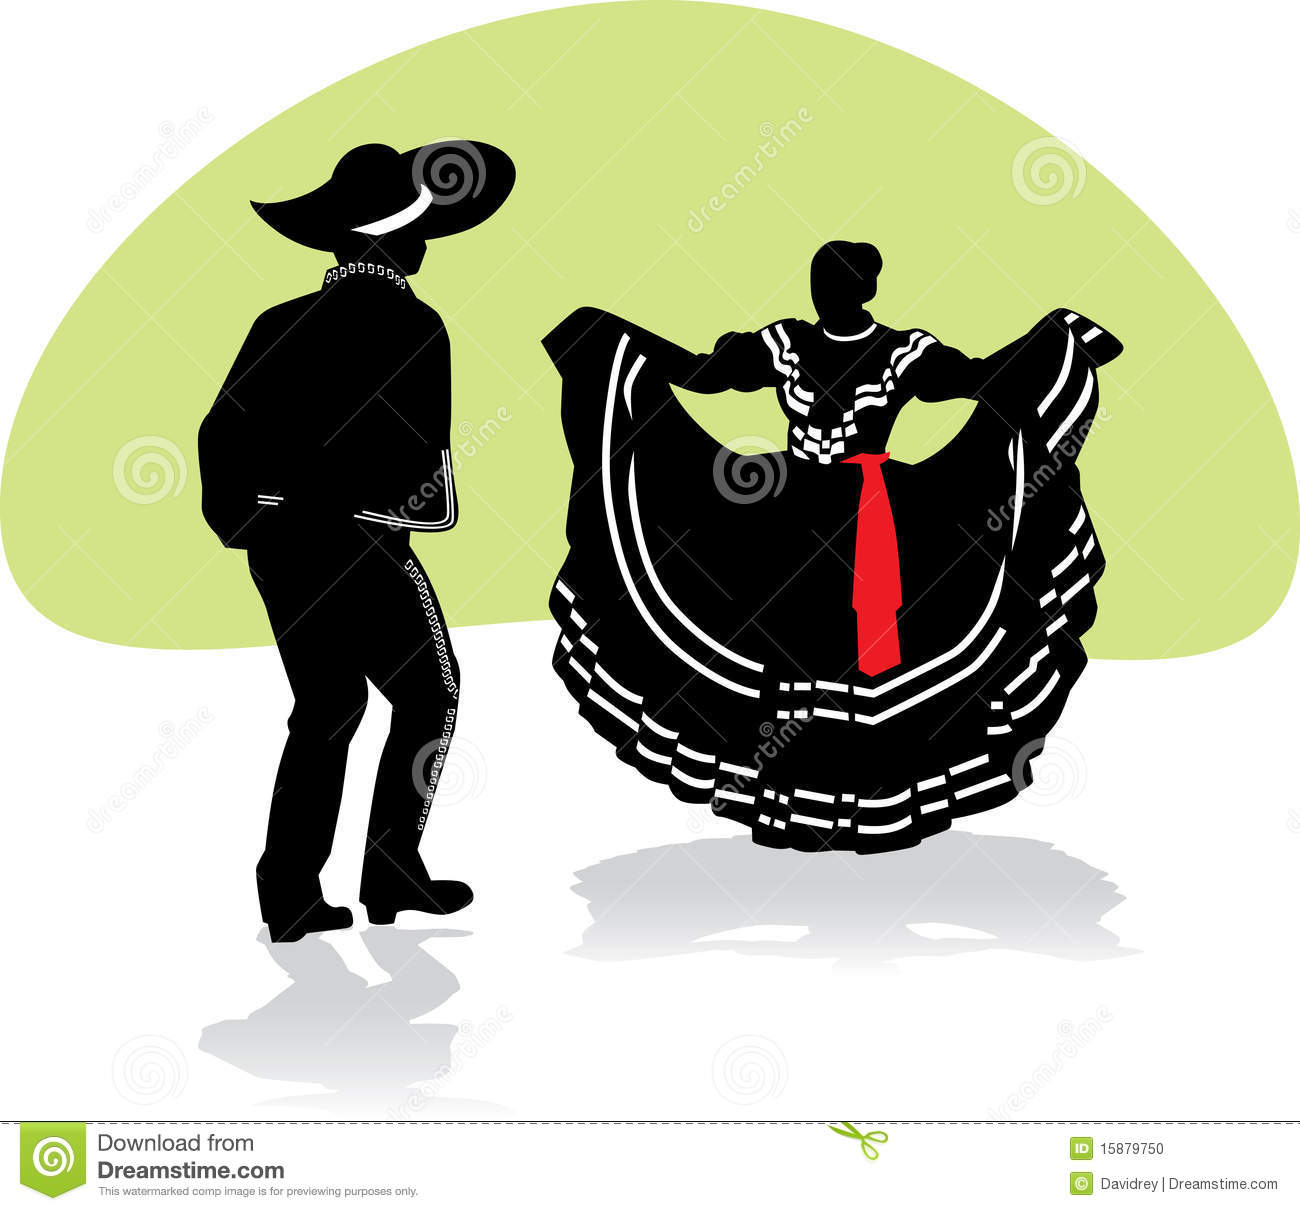 Mexican Folkloric Dance Couple Stock Photo   Image  15879750